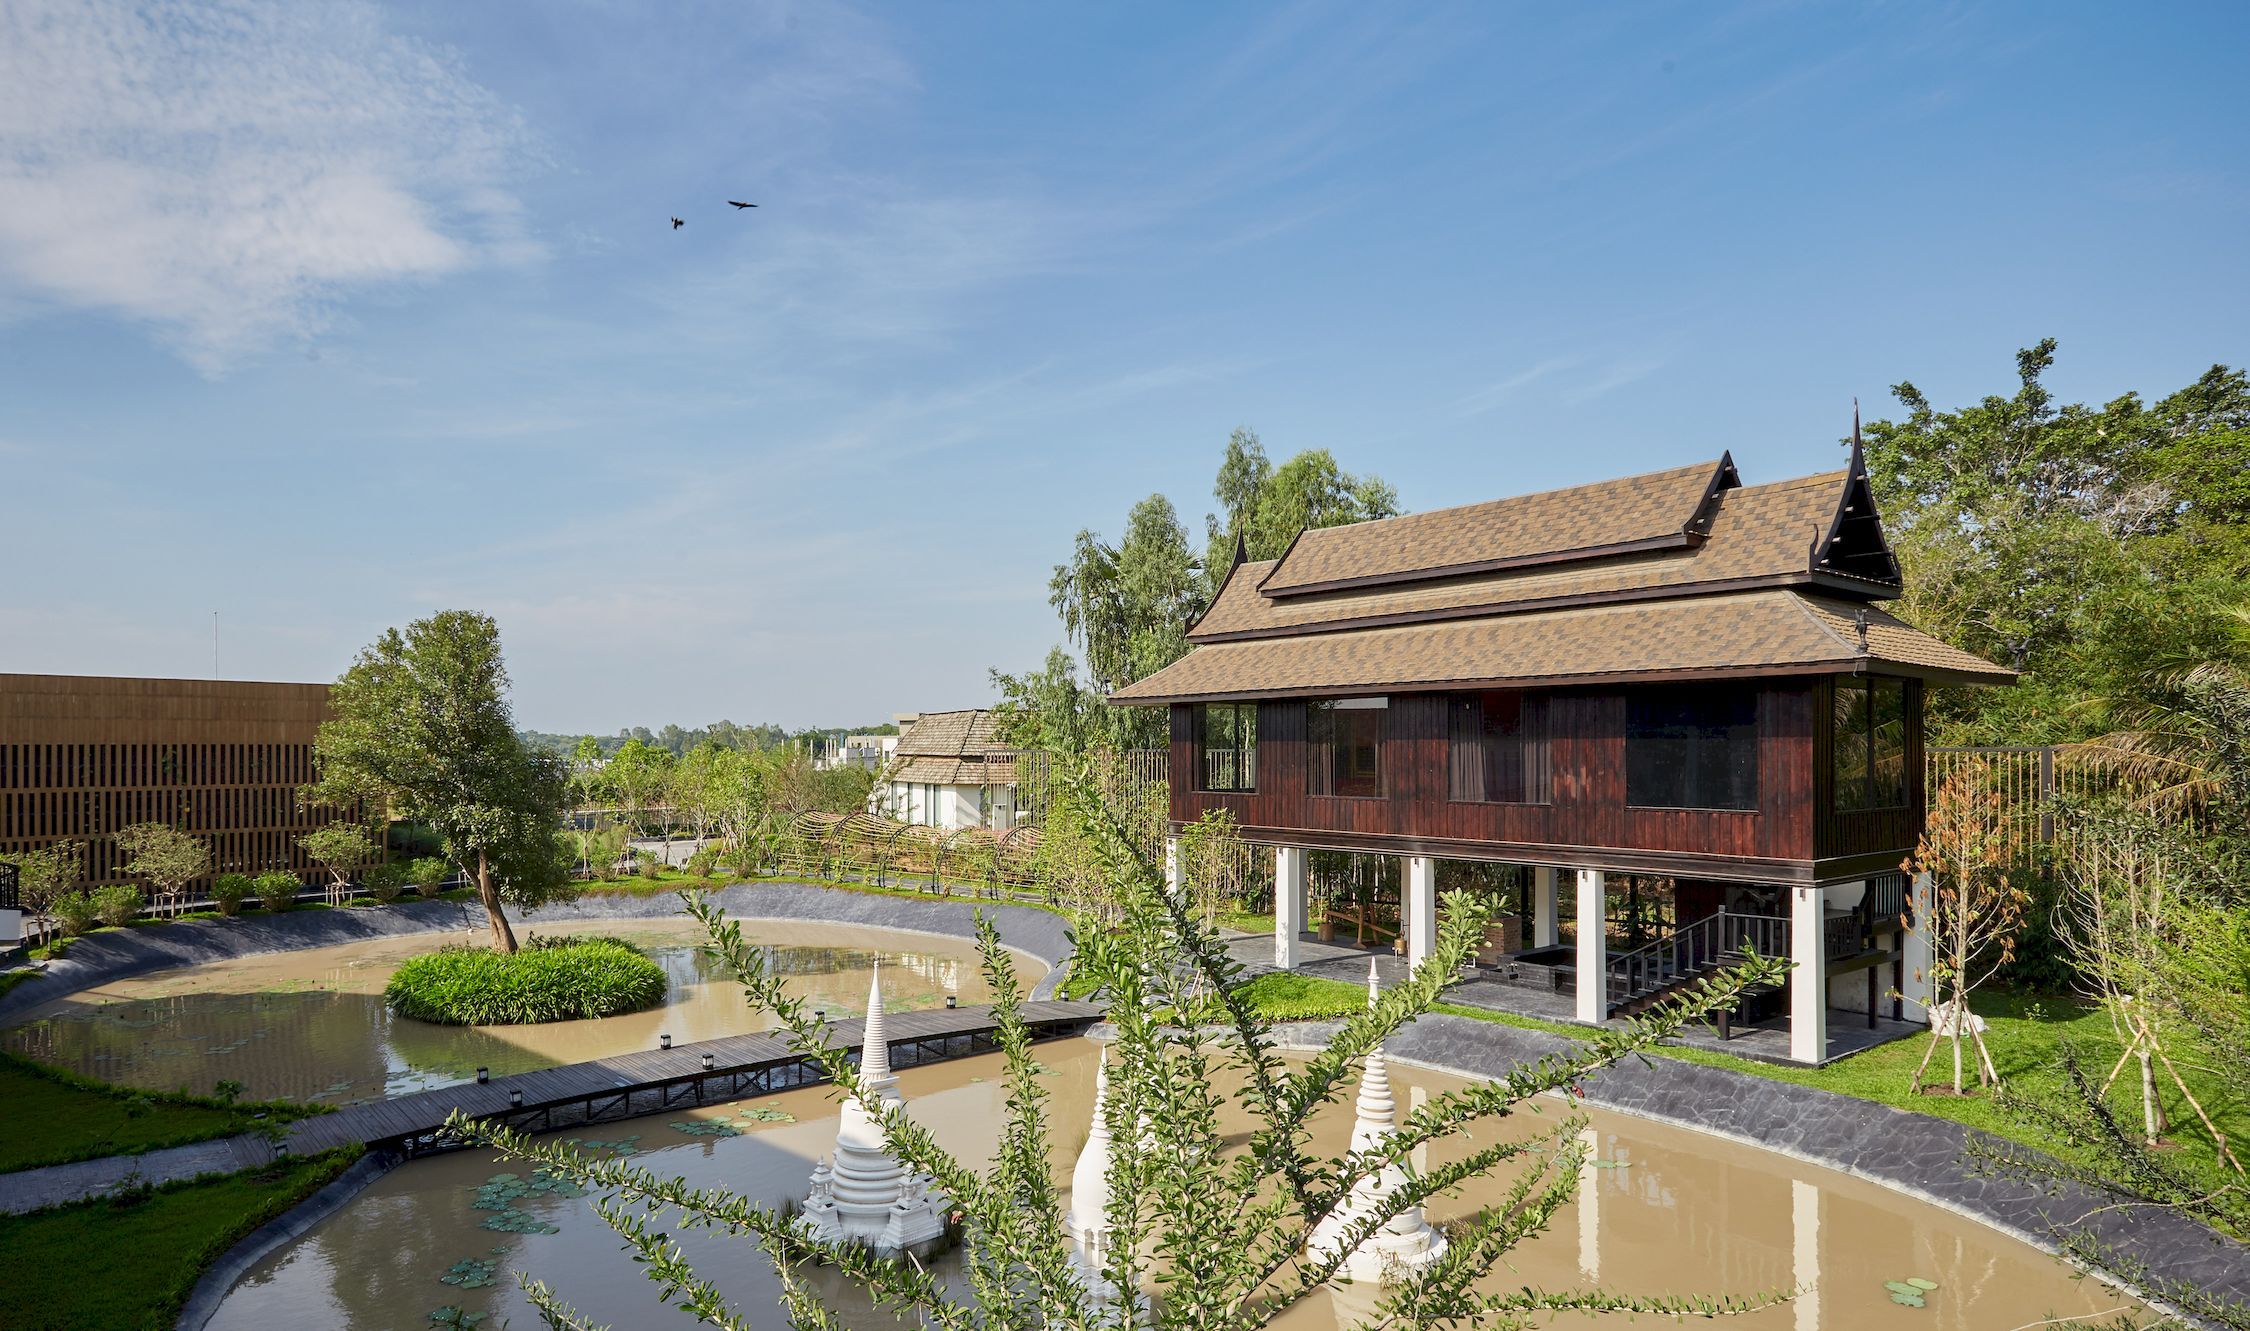 Thann Wellness Destination in Ayutthaya is a luxury escape from the madding crowd